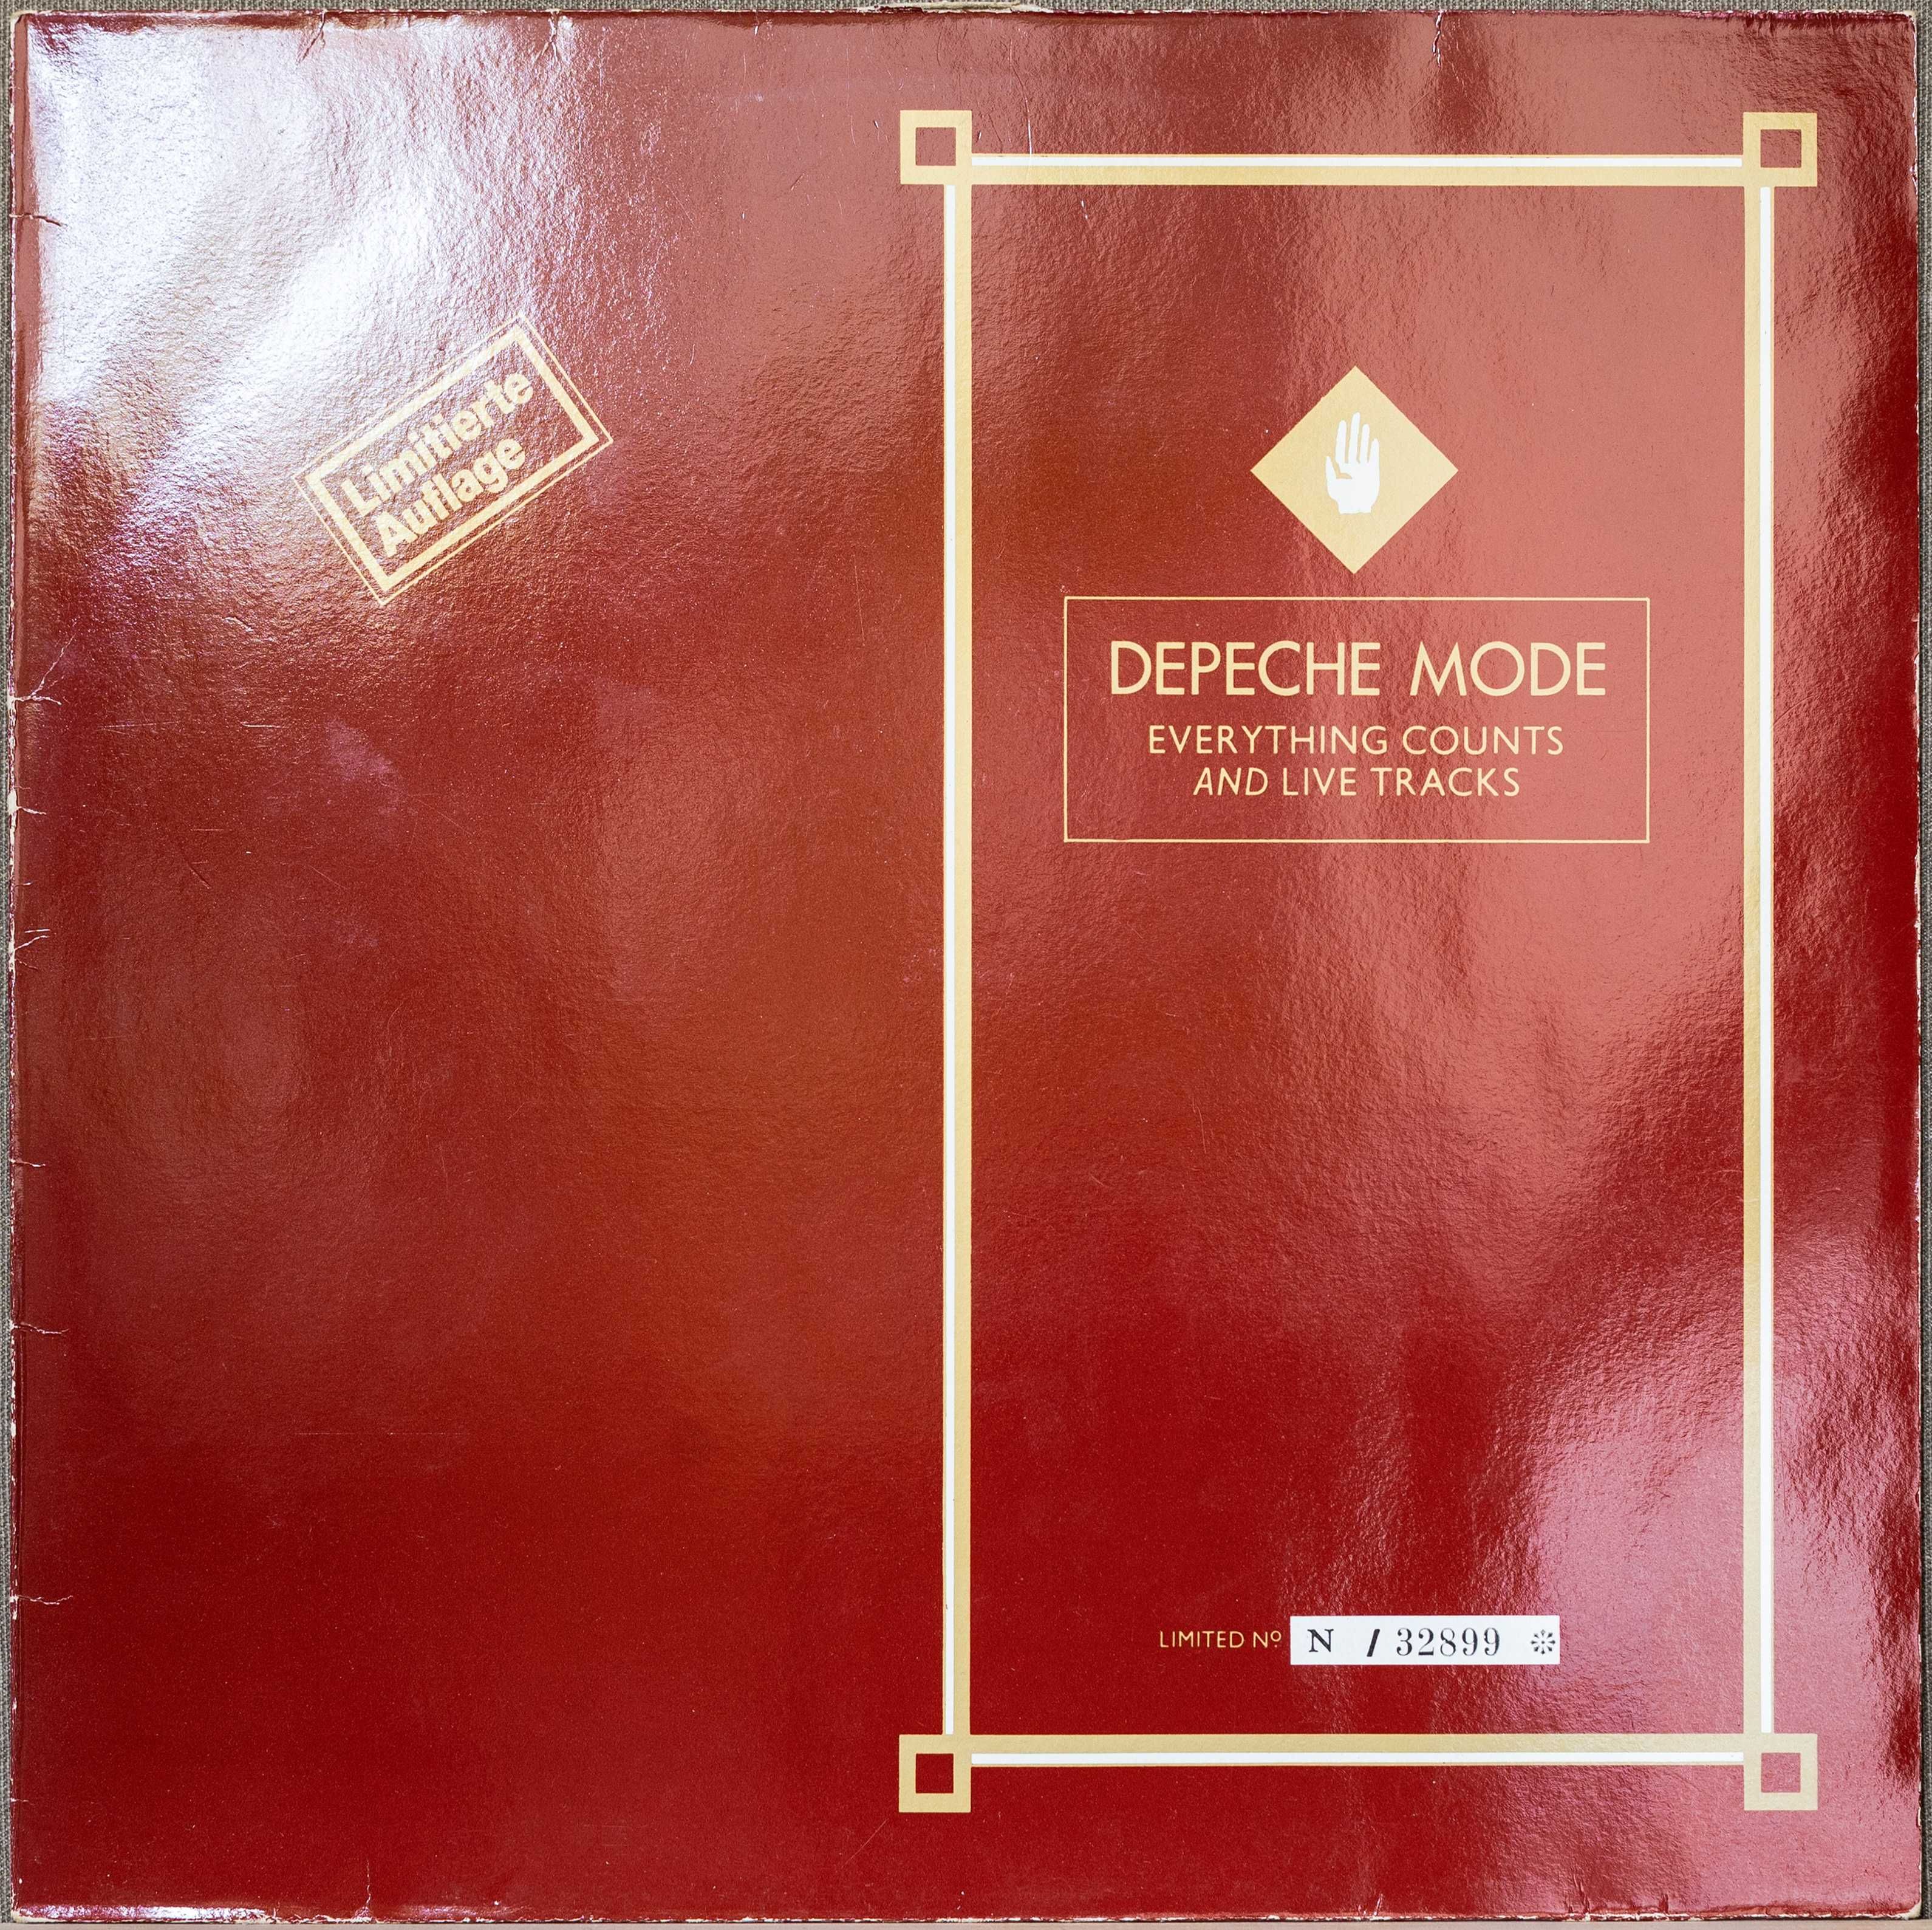 Depeche Mode - Everything Counts And Live Tracks - INT 136.801 N/32899